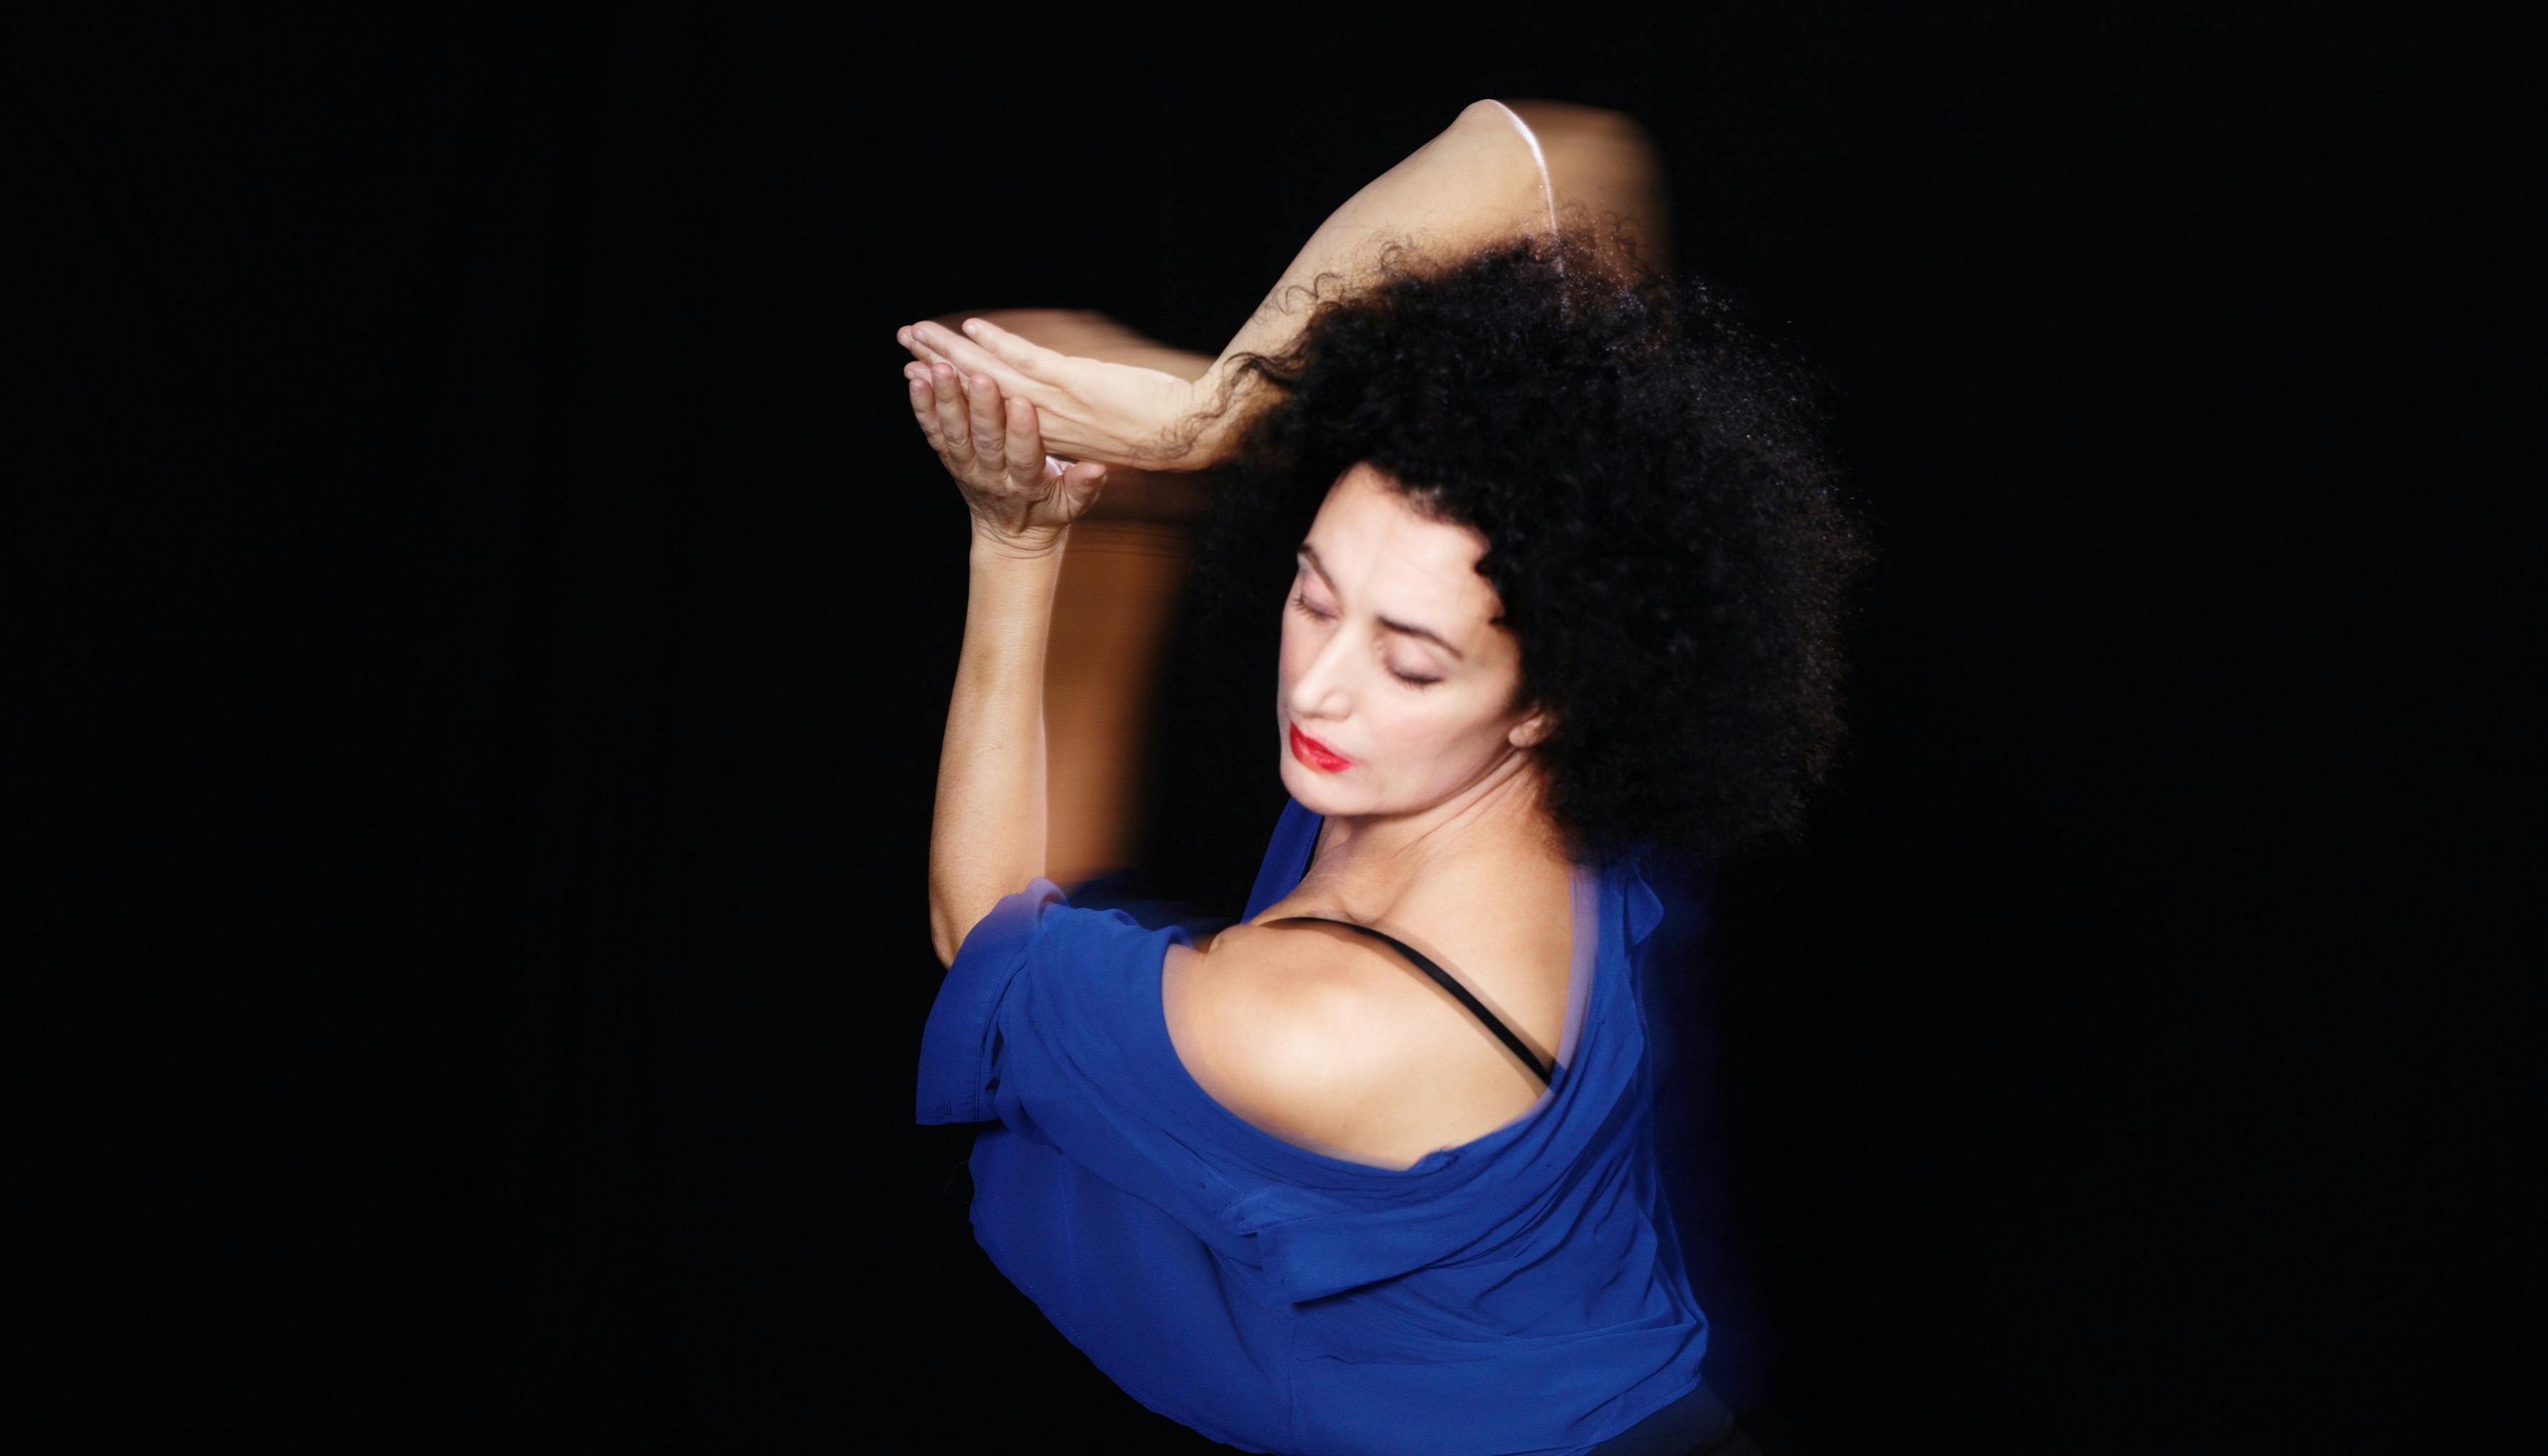 Photo on black background of Cristiana Morganti in a dance pose with her arms joined and half raised sideways